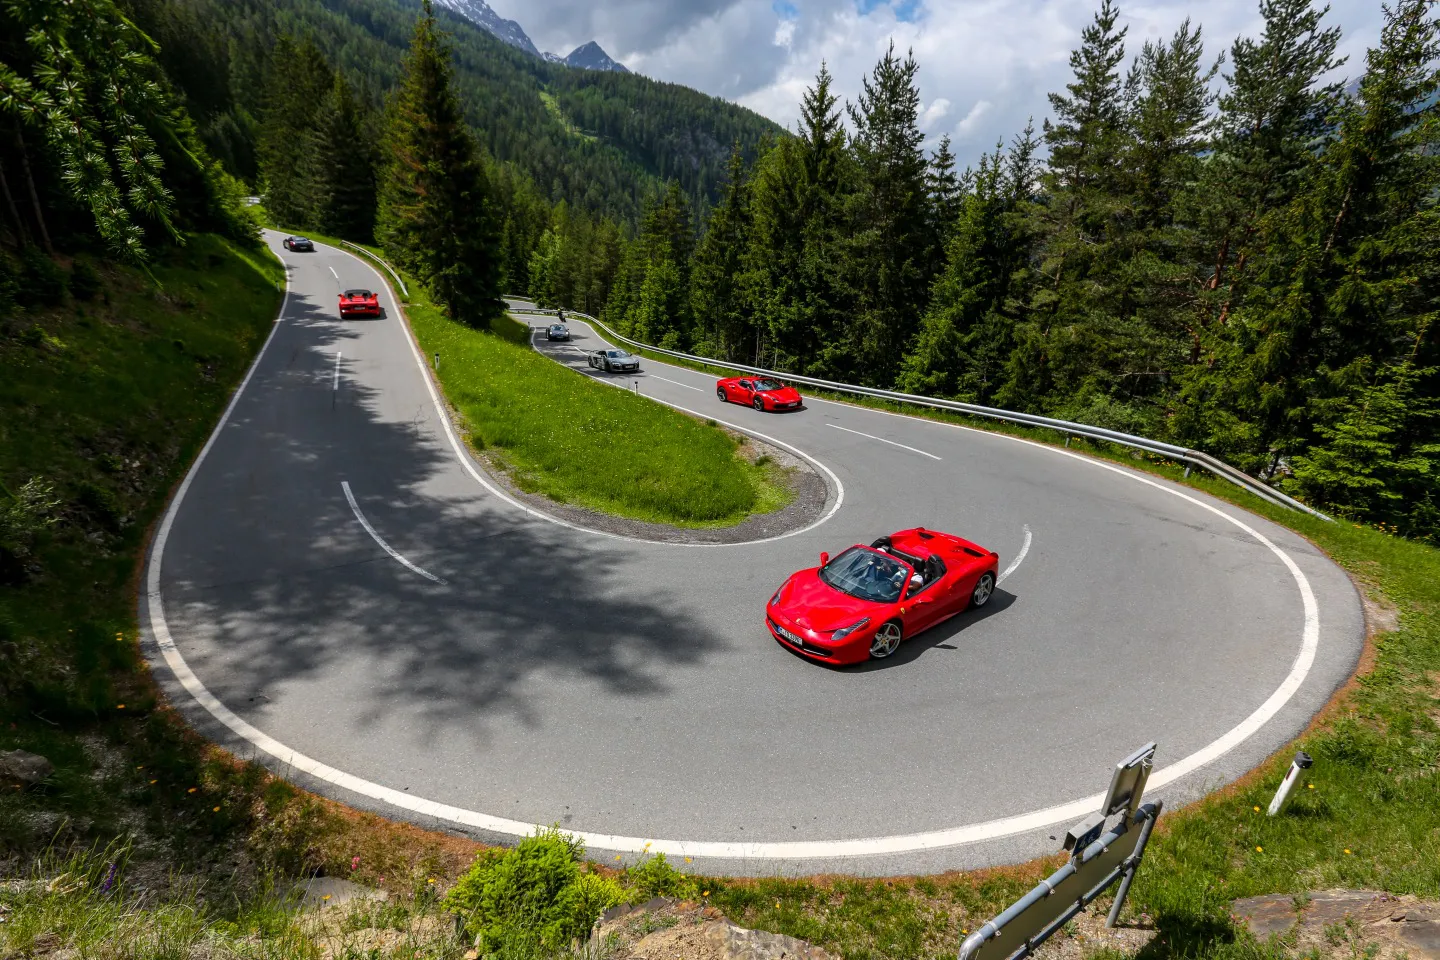 Ferrari, Lamborghini and more on a luxury holiday and supercar tour of the Swiss Alps